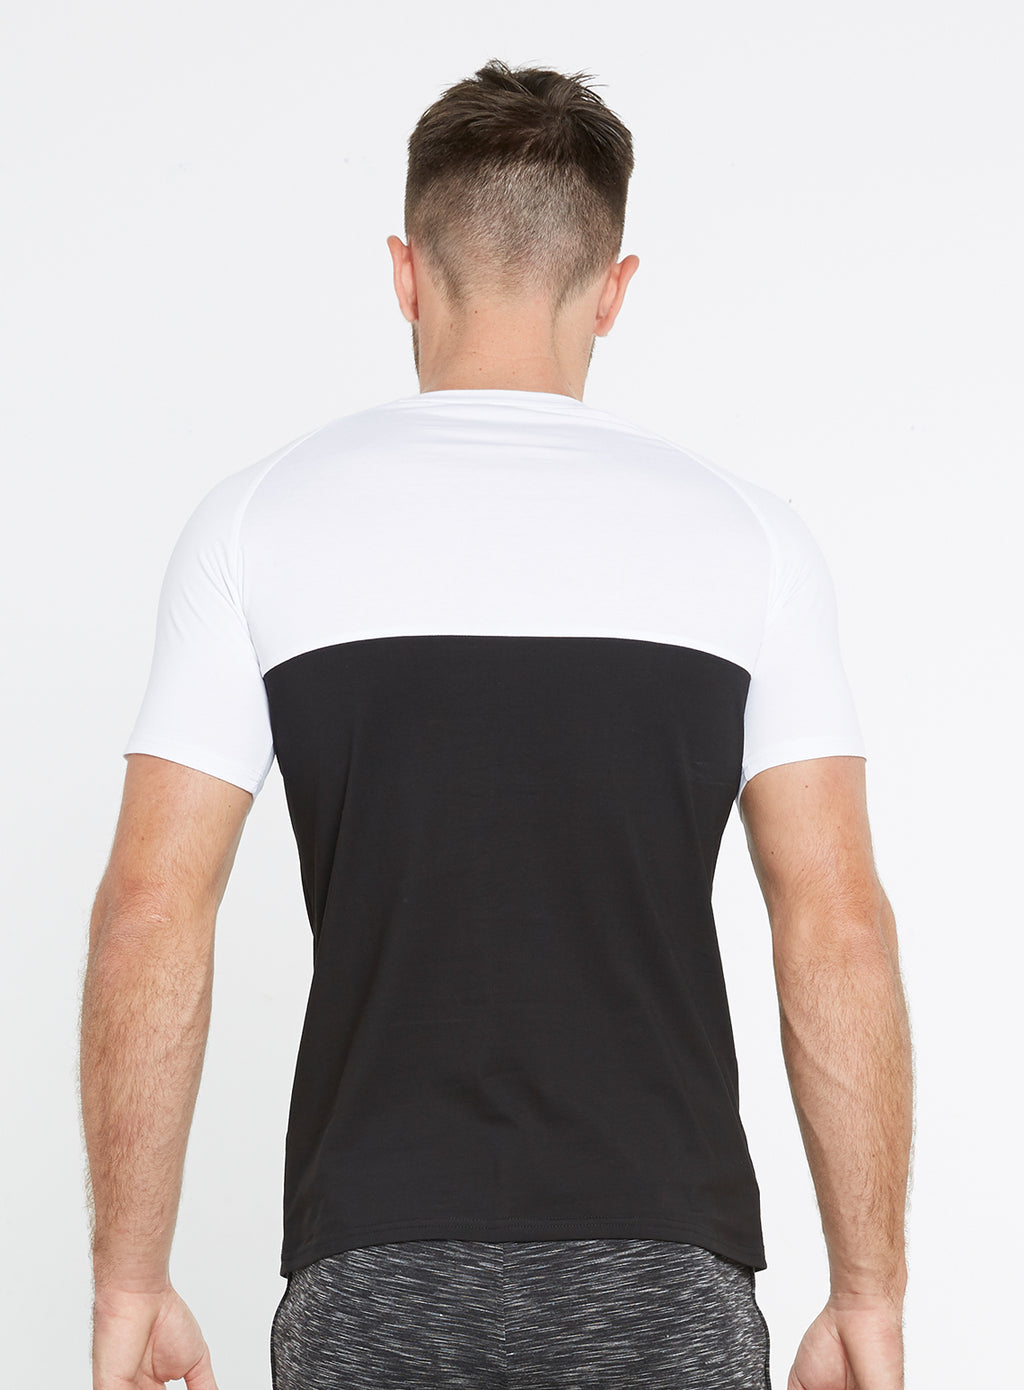 Gym Monkee - Black and White Tee REAR